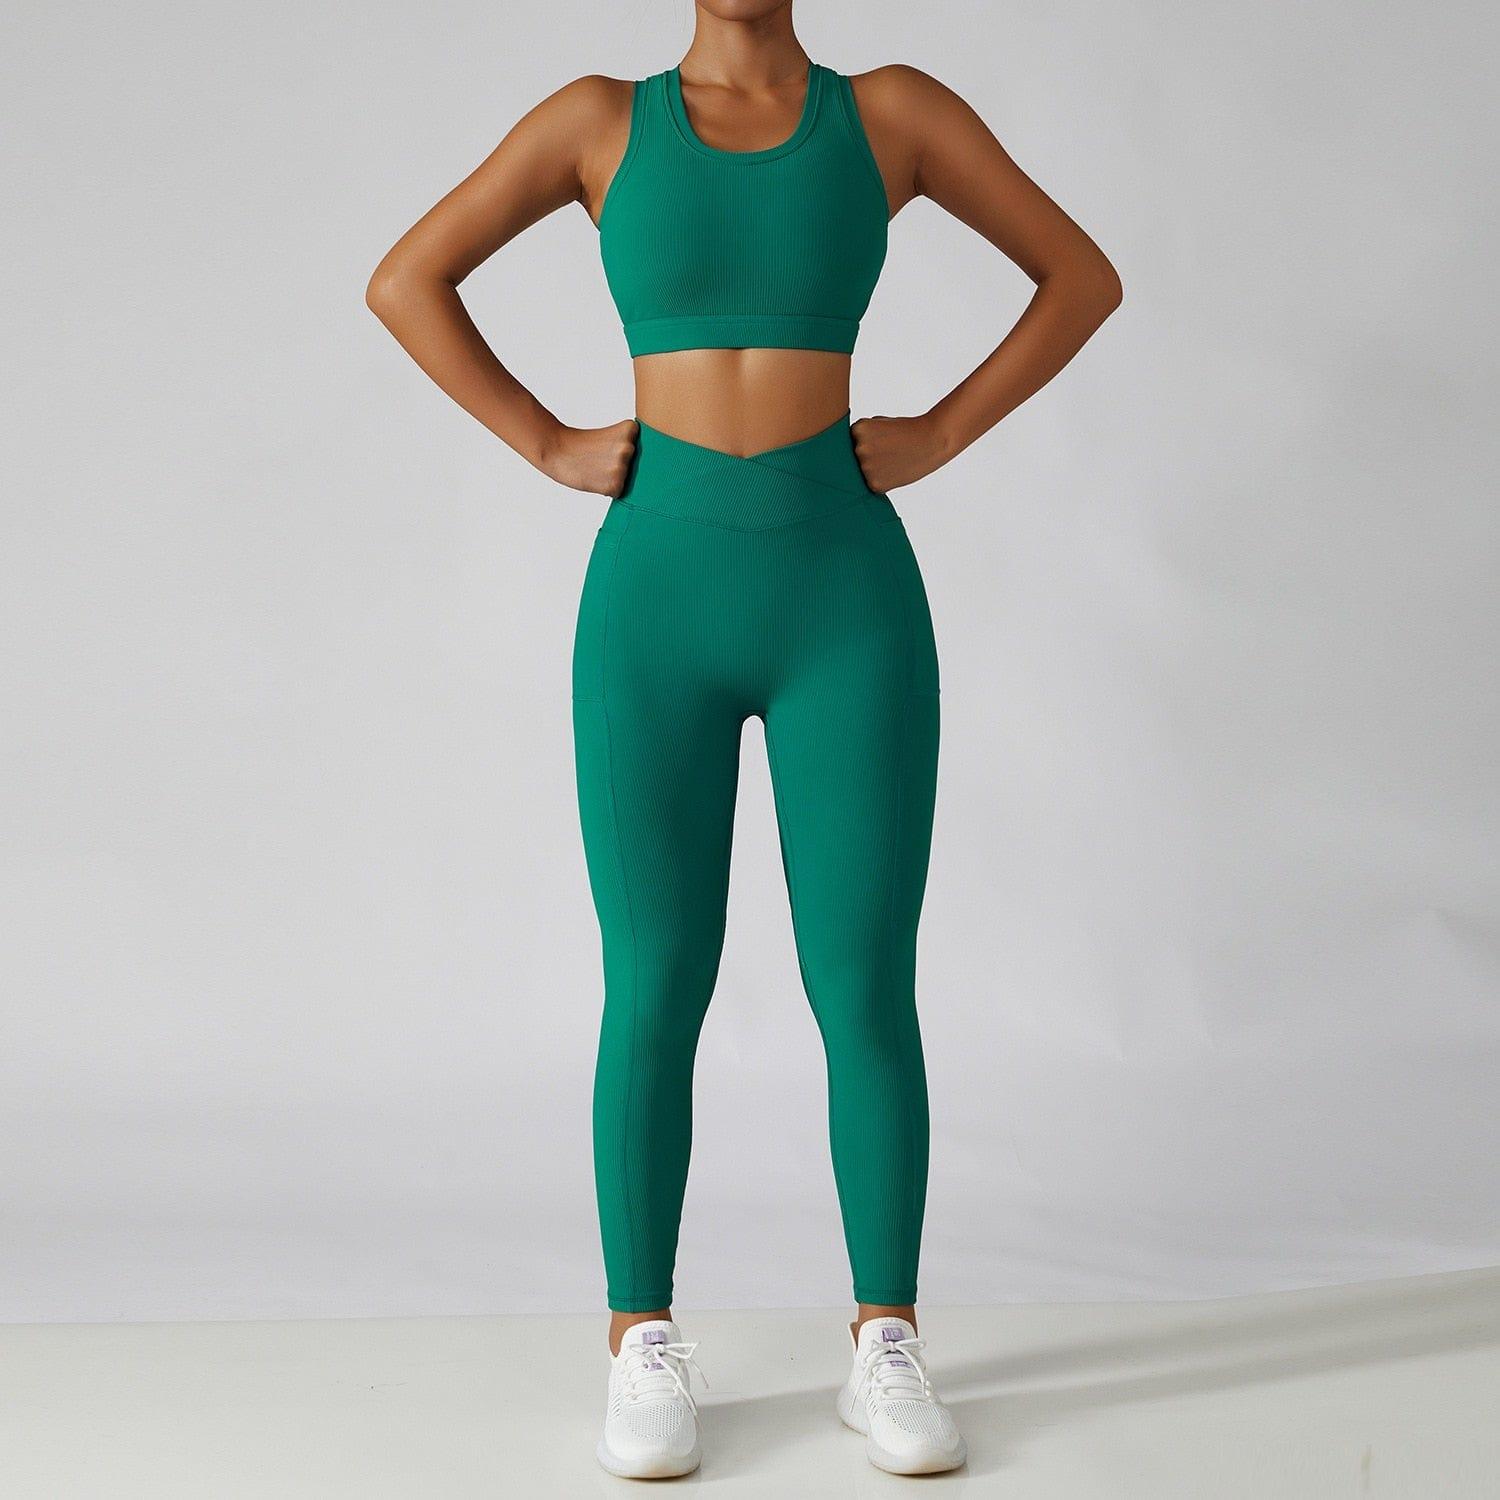 Shop 0 Green suit-4 / S / China 2 Pieces Seamless Women Tracksuit  Yoga Set Running Workout Sportswear Gym Clothes Fitness Bra High Waist Leggings Sports Suit Mademoiselle Home Decor